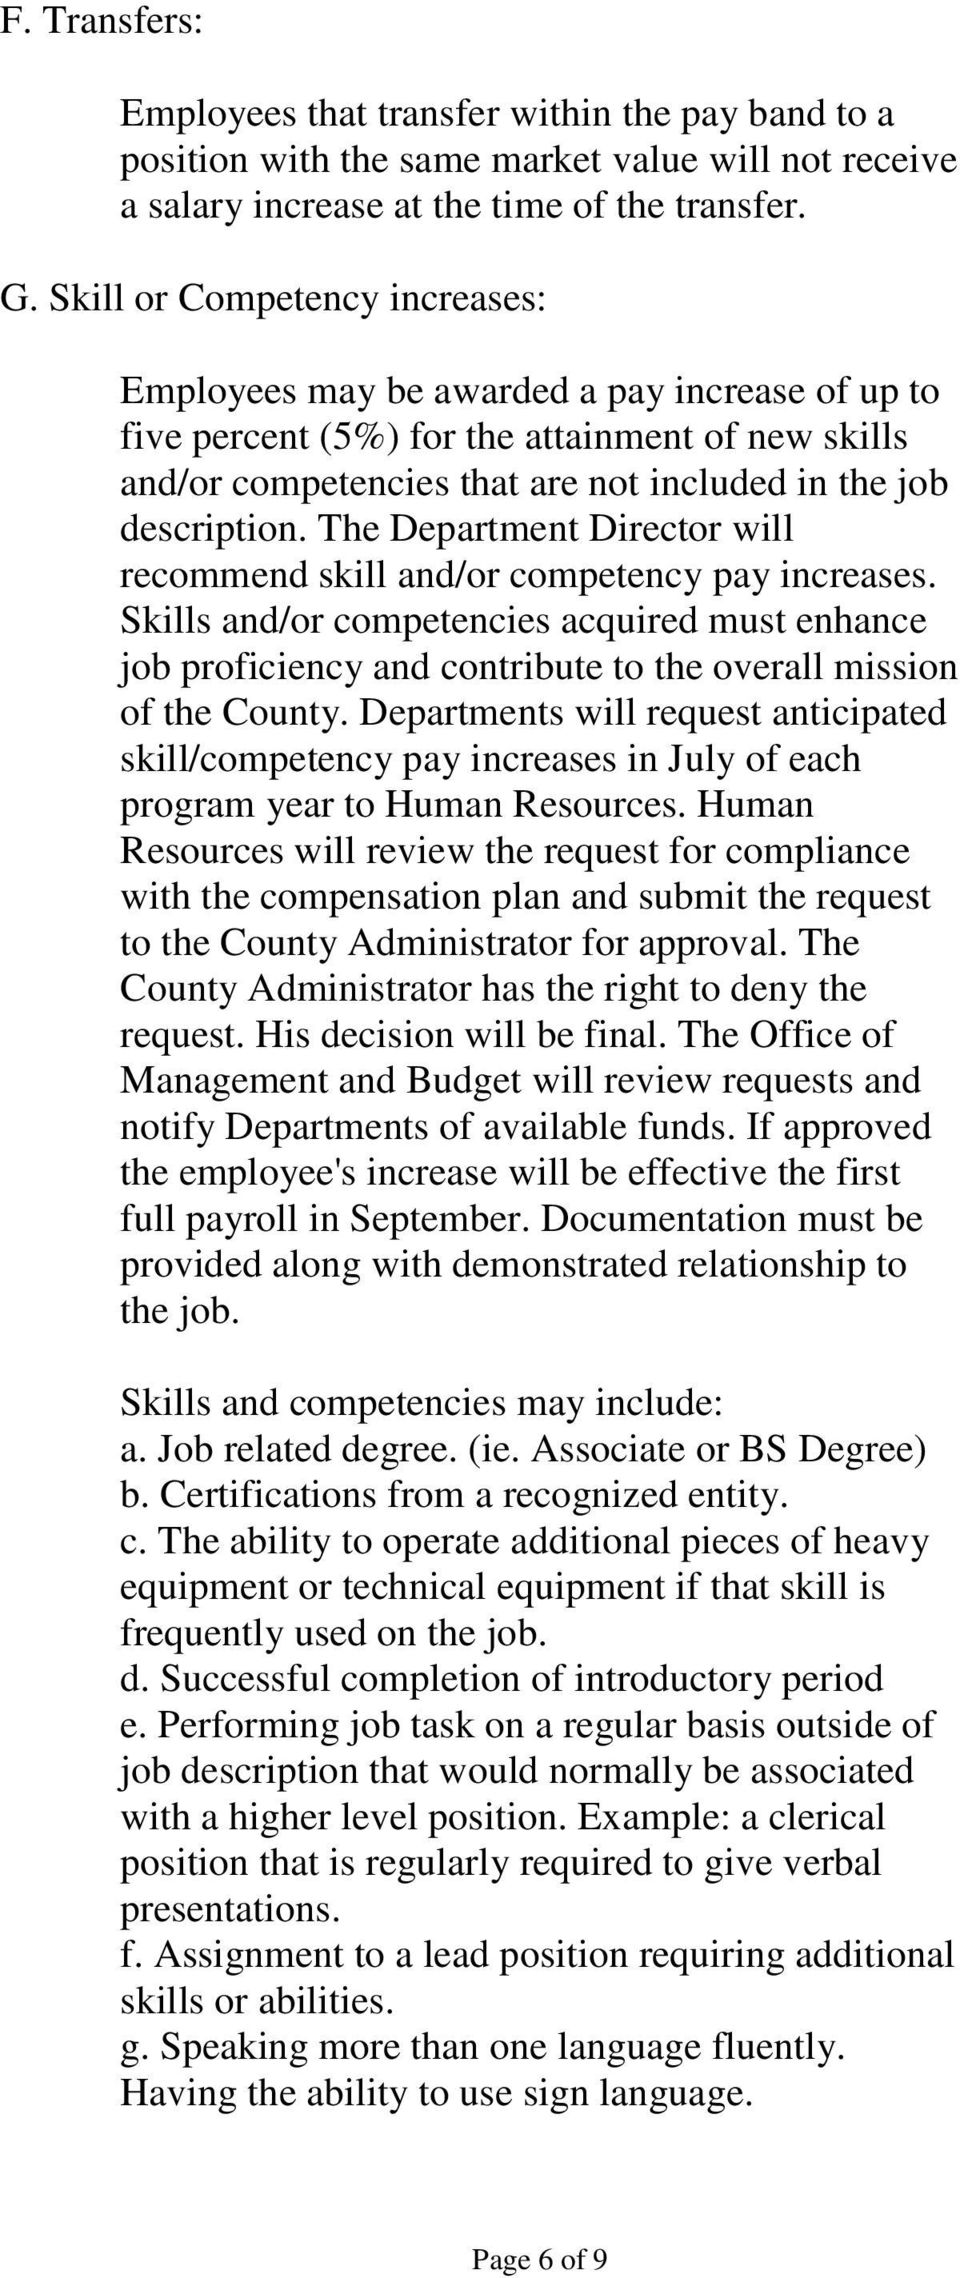 The Department Director will recommend skill and/or competency pay increases. Skills and/or competencies acquired must enhance job proficiency and contribute to the overall mission of the County.